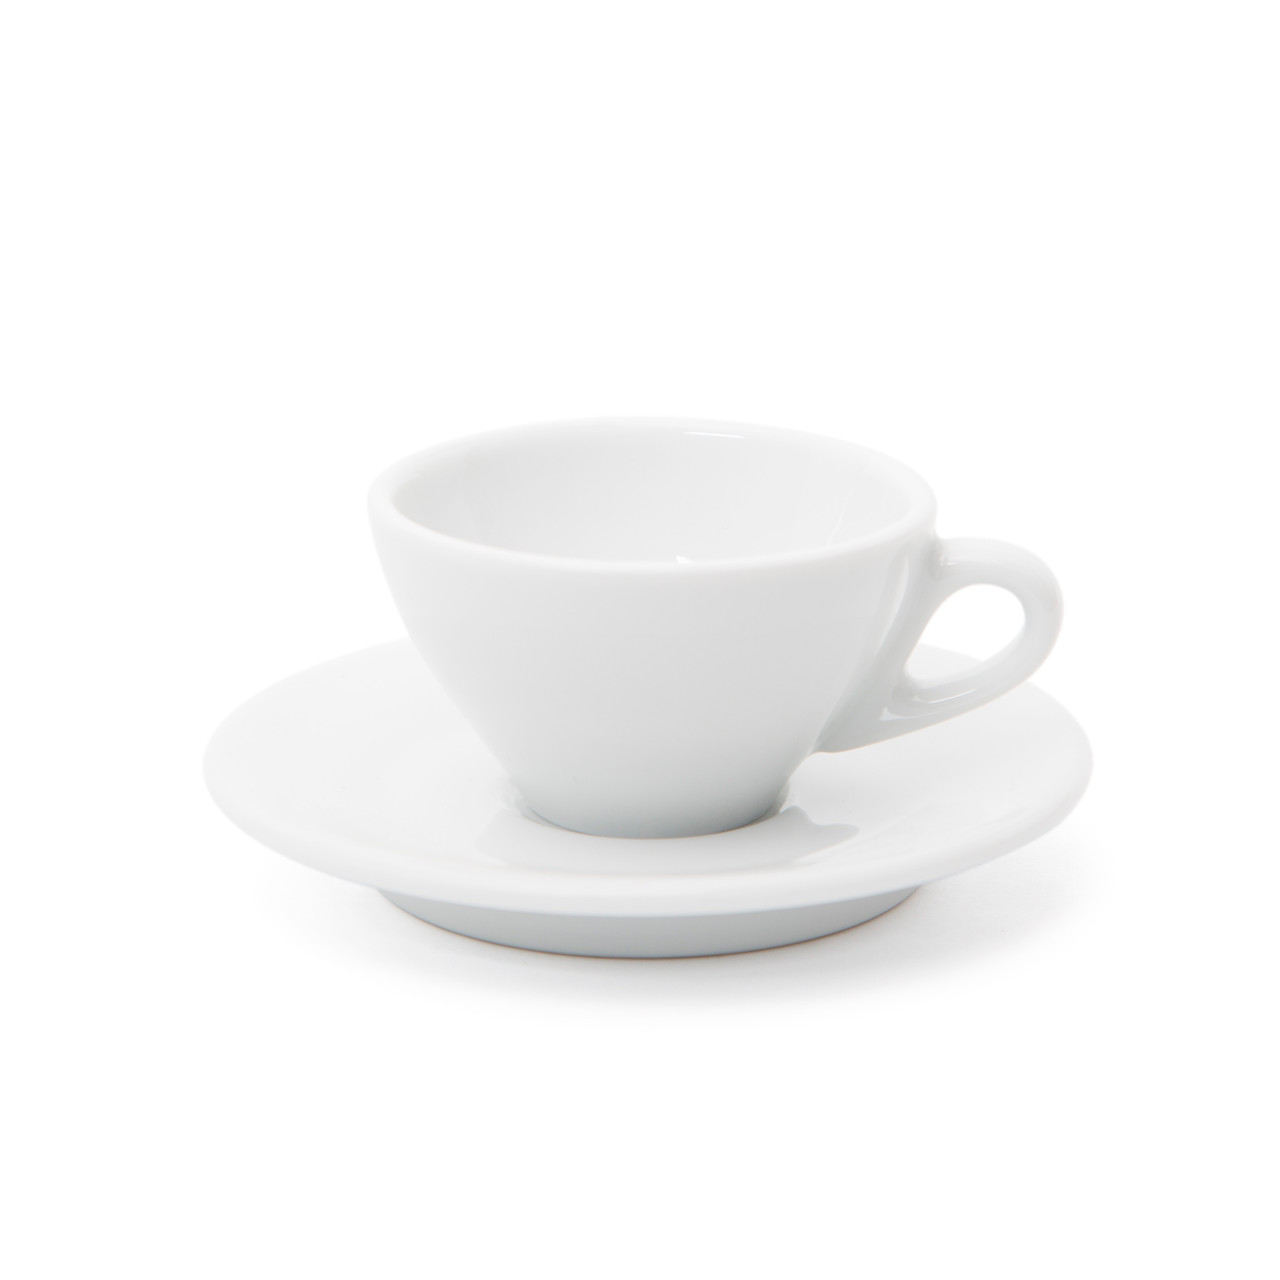 https://cdn11.bigcommerce.com/s-qnui5gocu2/images/stencil/1280x1280/products/284/1145/Front-33404-Ancona-Espresso-Cup-and-Saucer-2.7oz__84002.1597157770.jpg?c=1